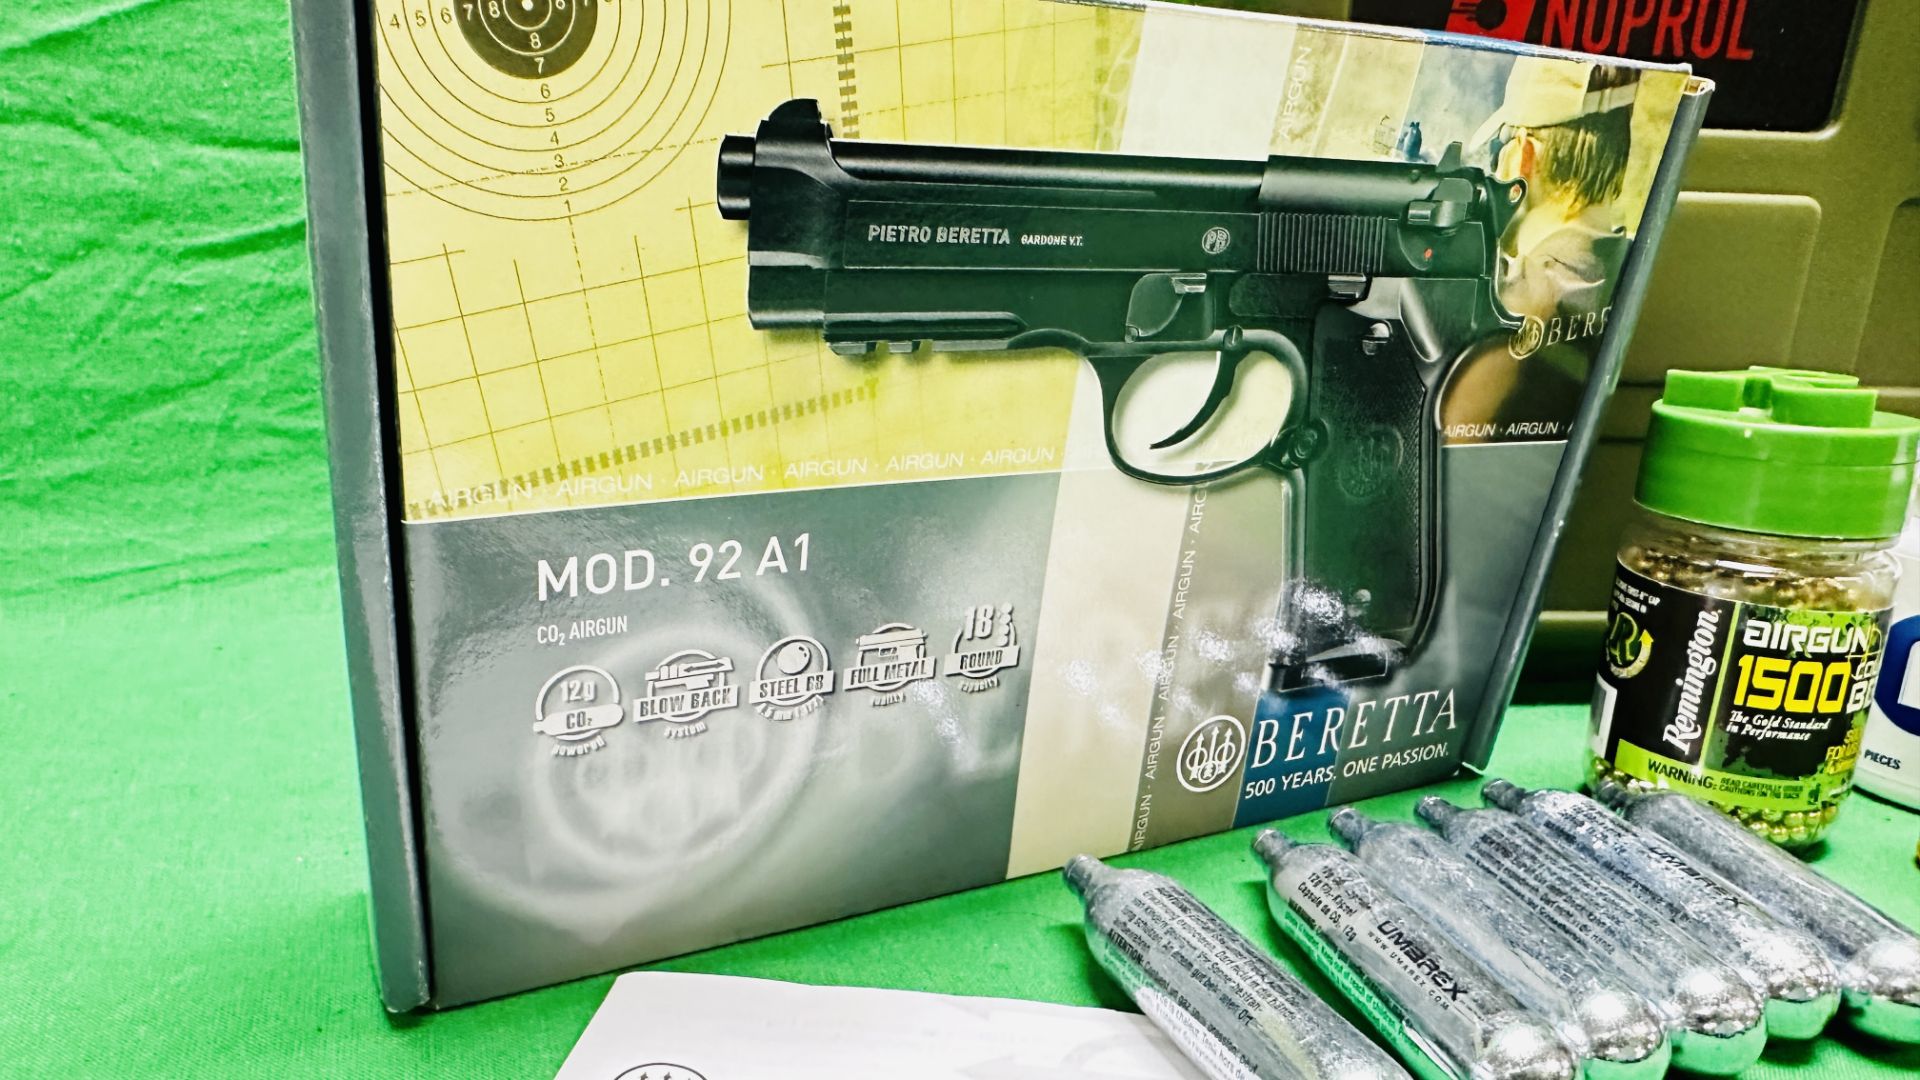 PIETRO BERETTA MOD 92 A1 18 ROUND CO2 BLOW BACK STEEL BB AIR PISTOL COMPLETE WITH ORIGINAL BOX, - Image 13 of 18